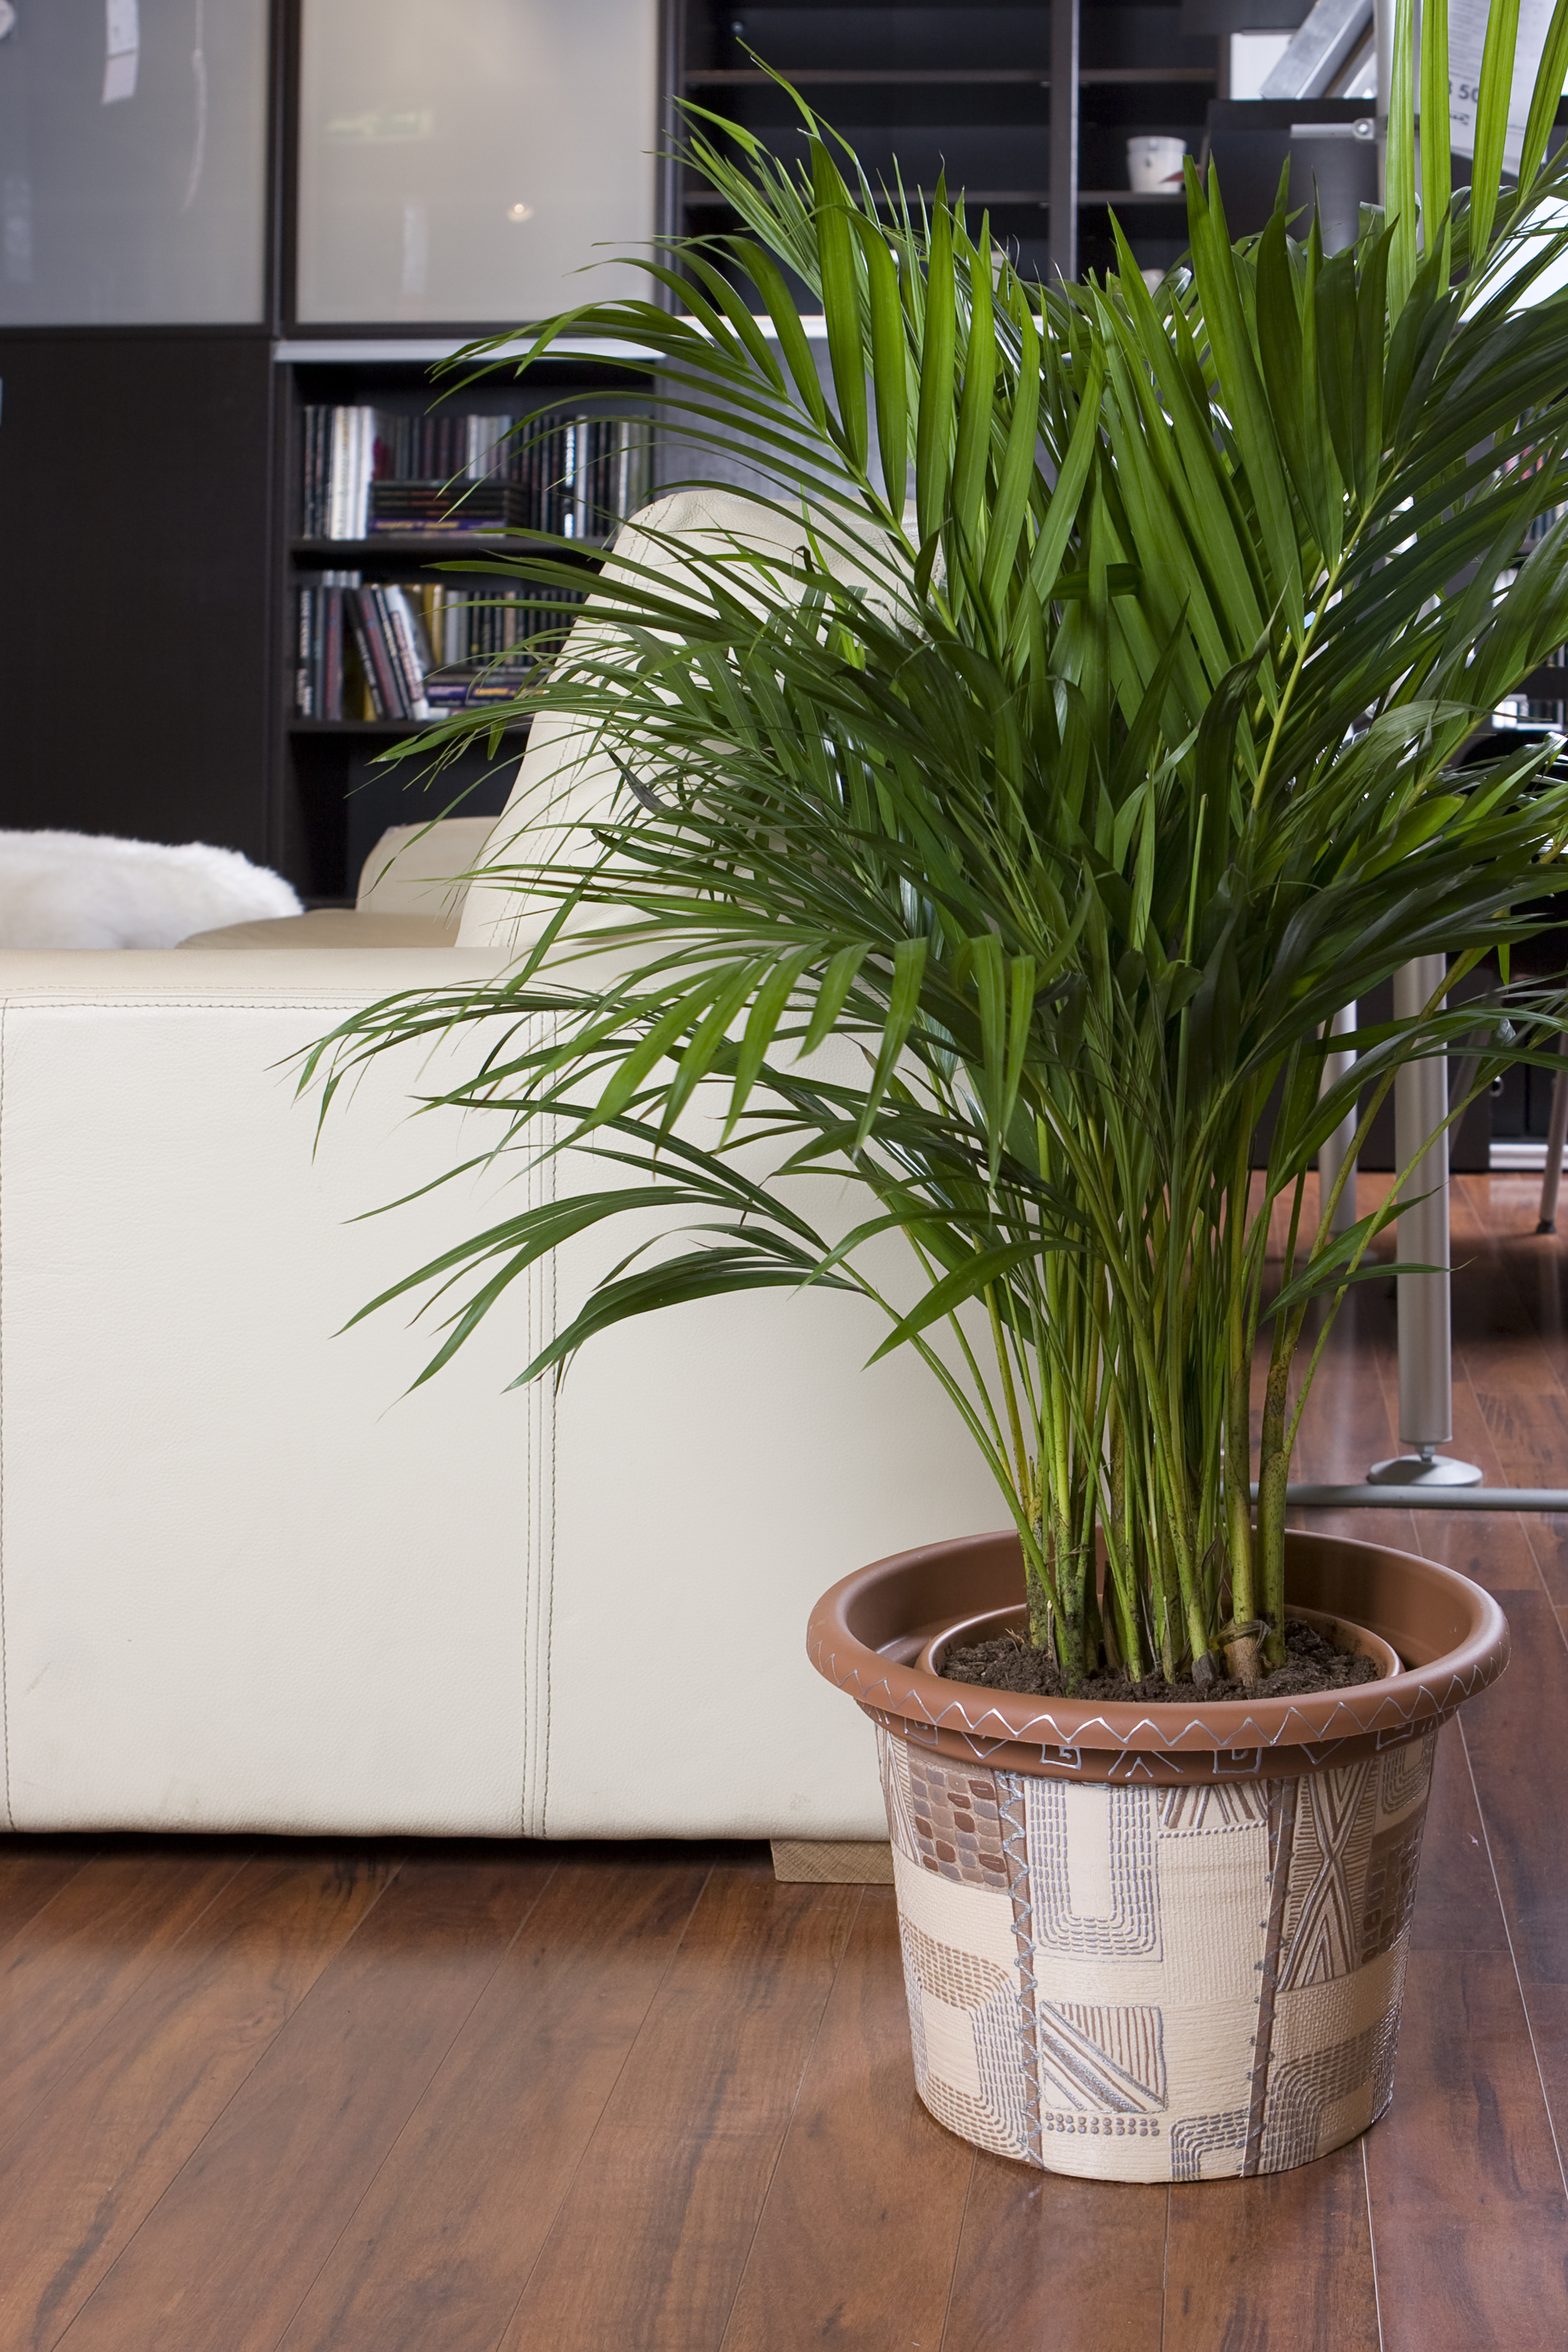 Protecting Houseplants from Pests